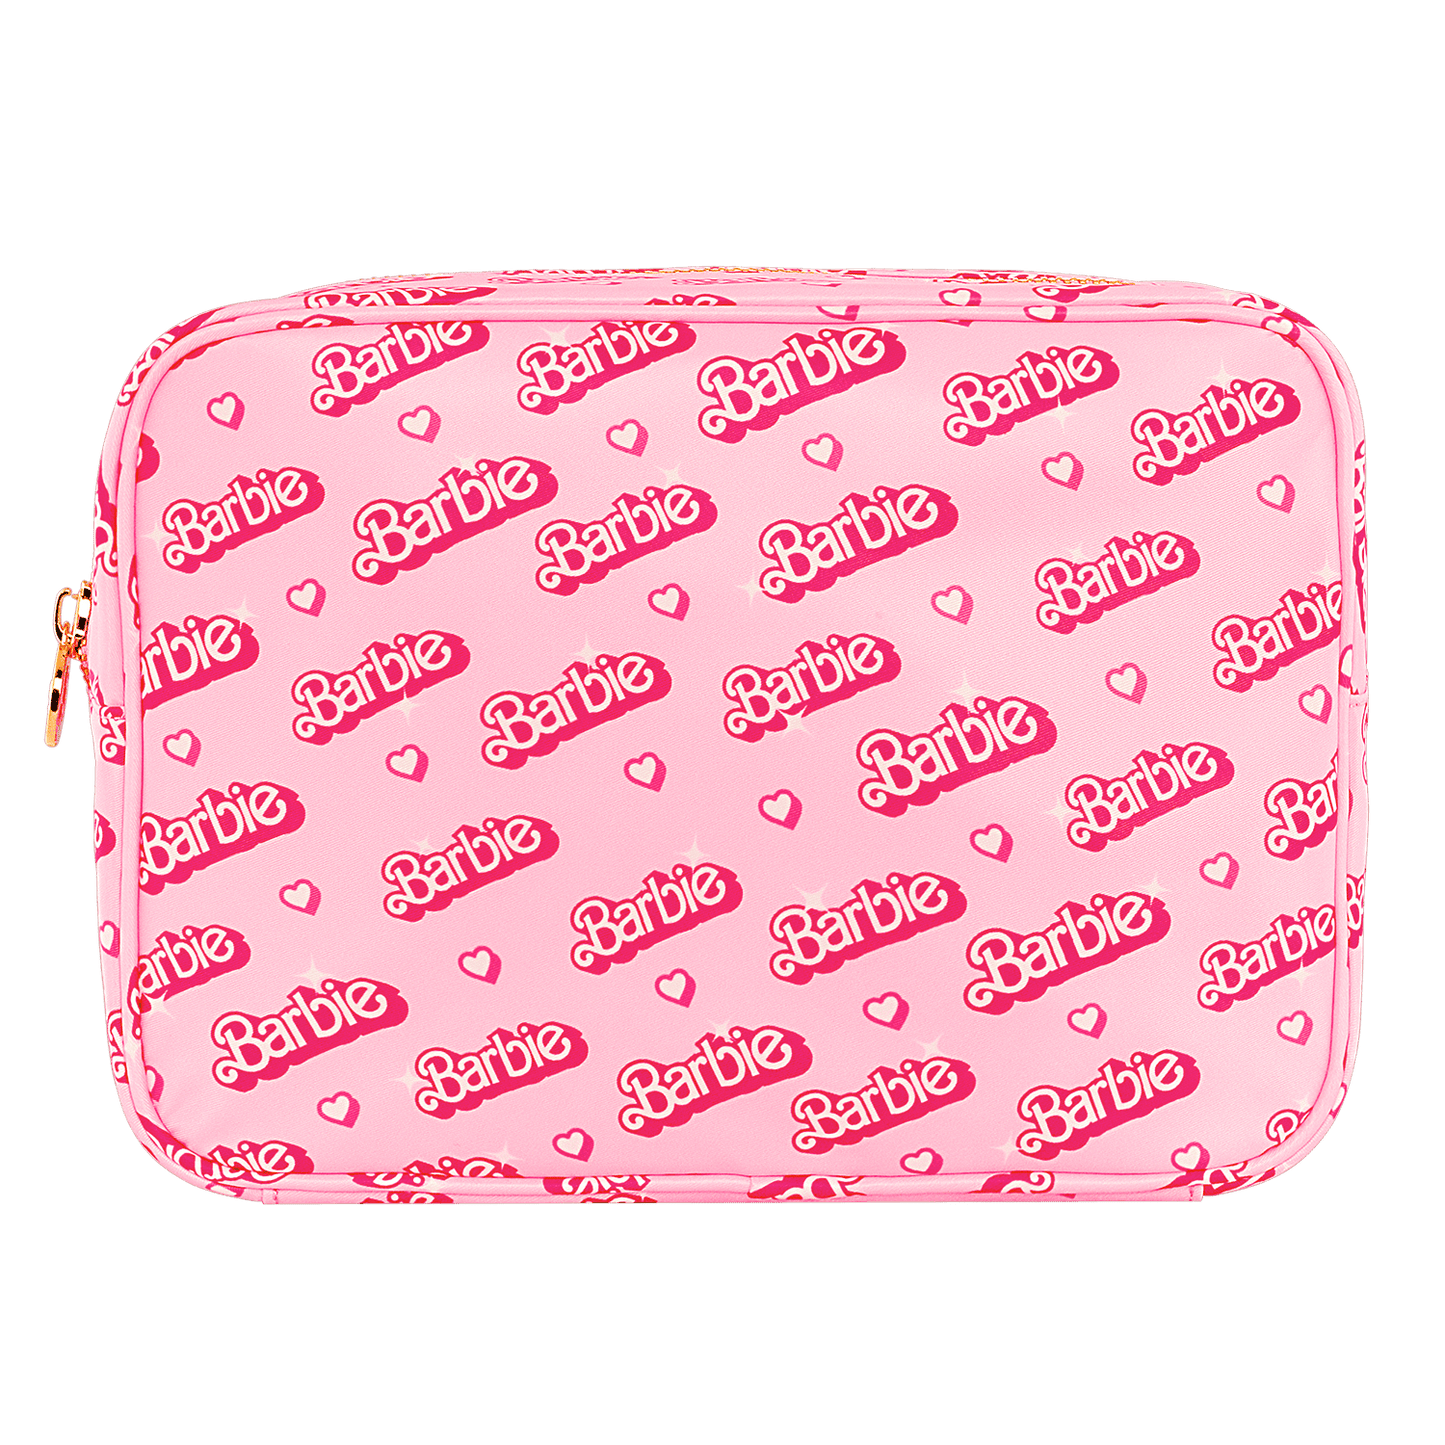 Barbie™ The Movie Large Pouch